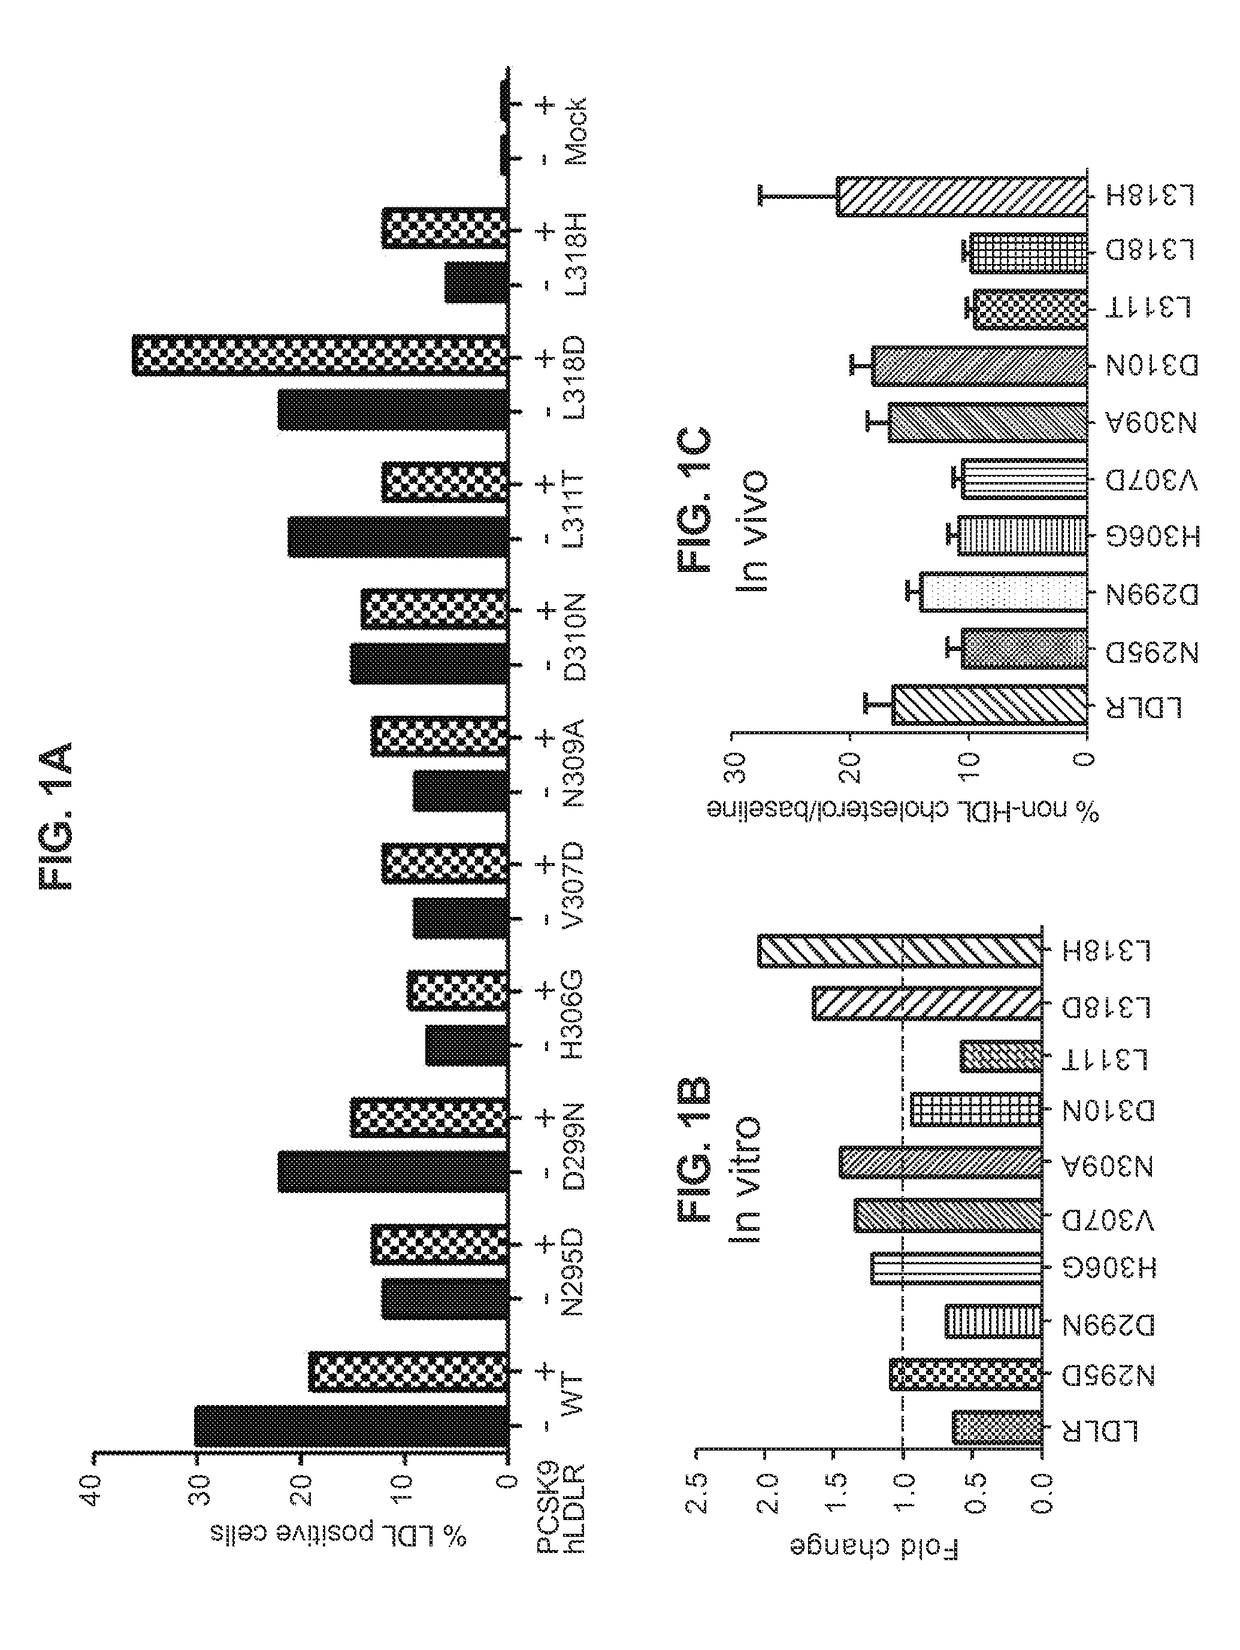 Ldlr variants and their use in compositions for reducing cholesterol levels